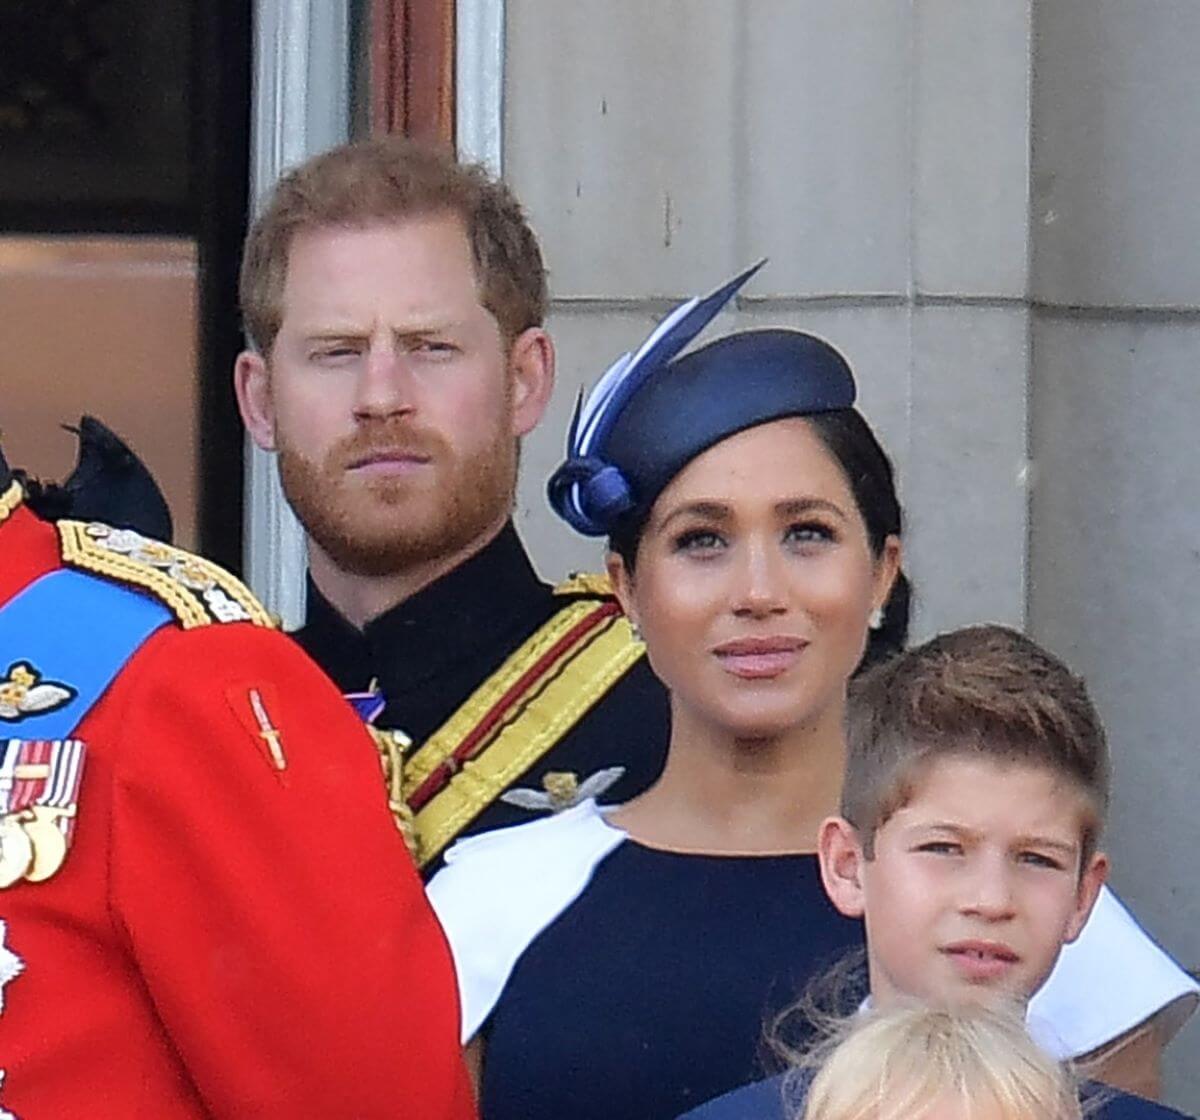 Prince Harry and Meghan Markle members of the Royal Family on the balcony of Buckingham Palace